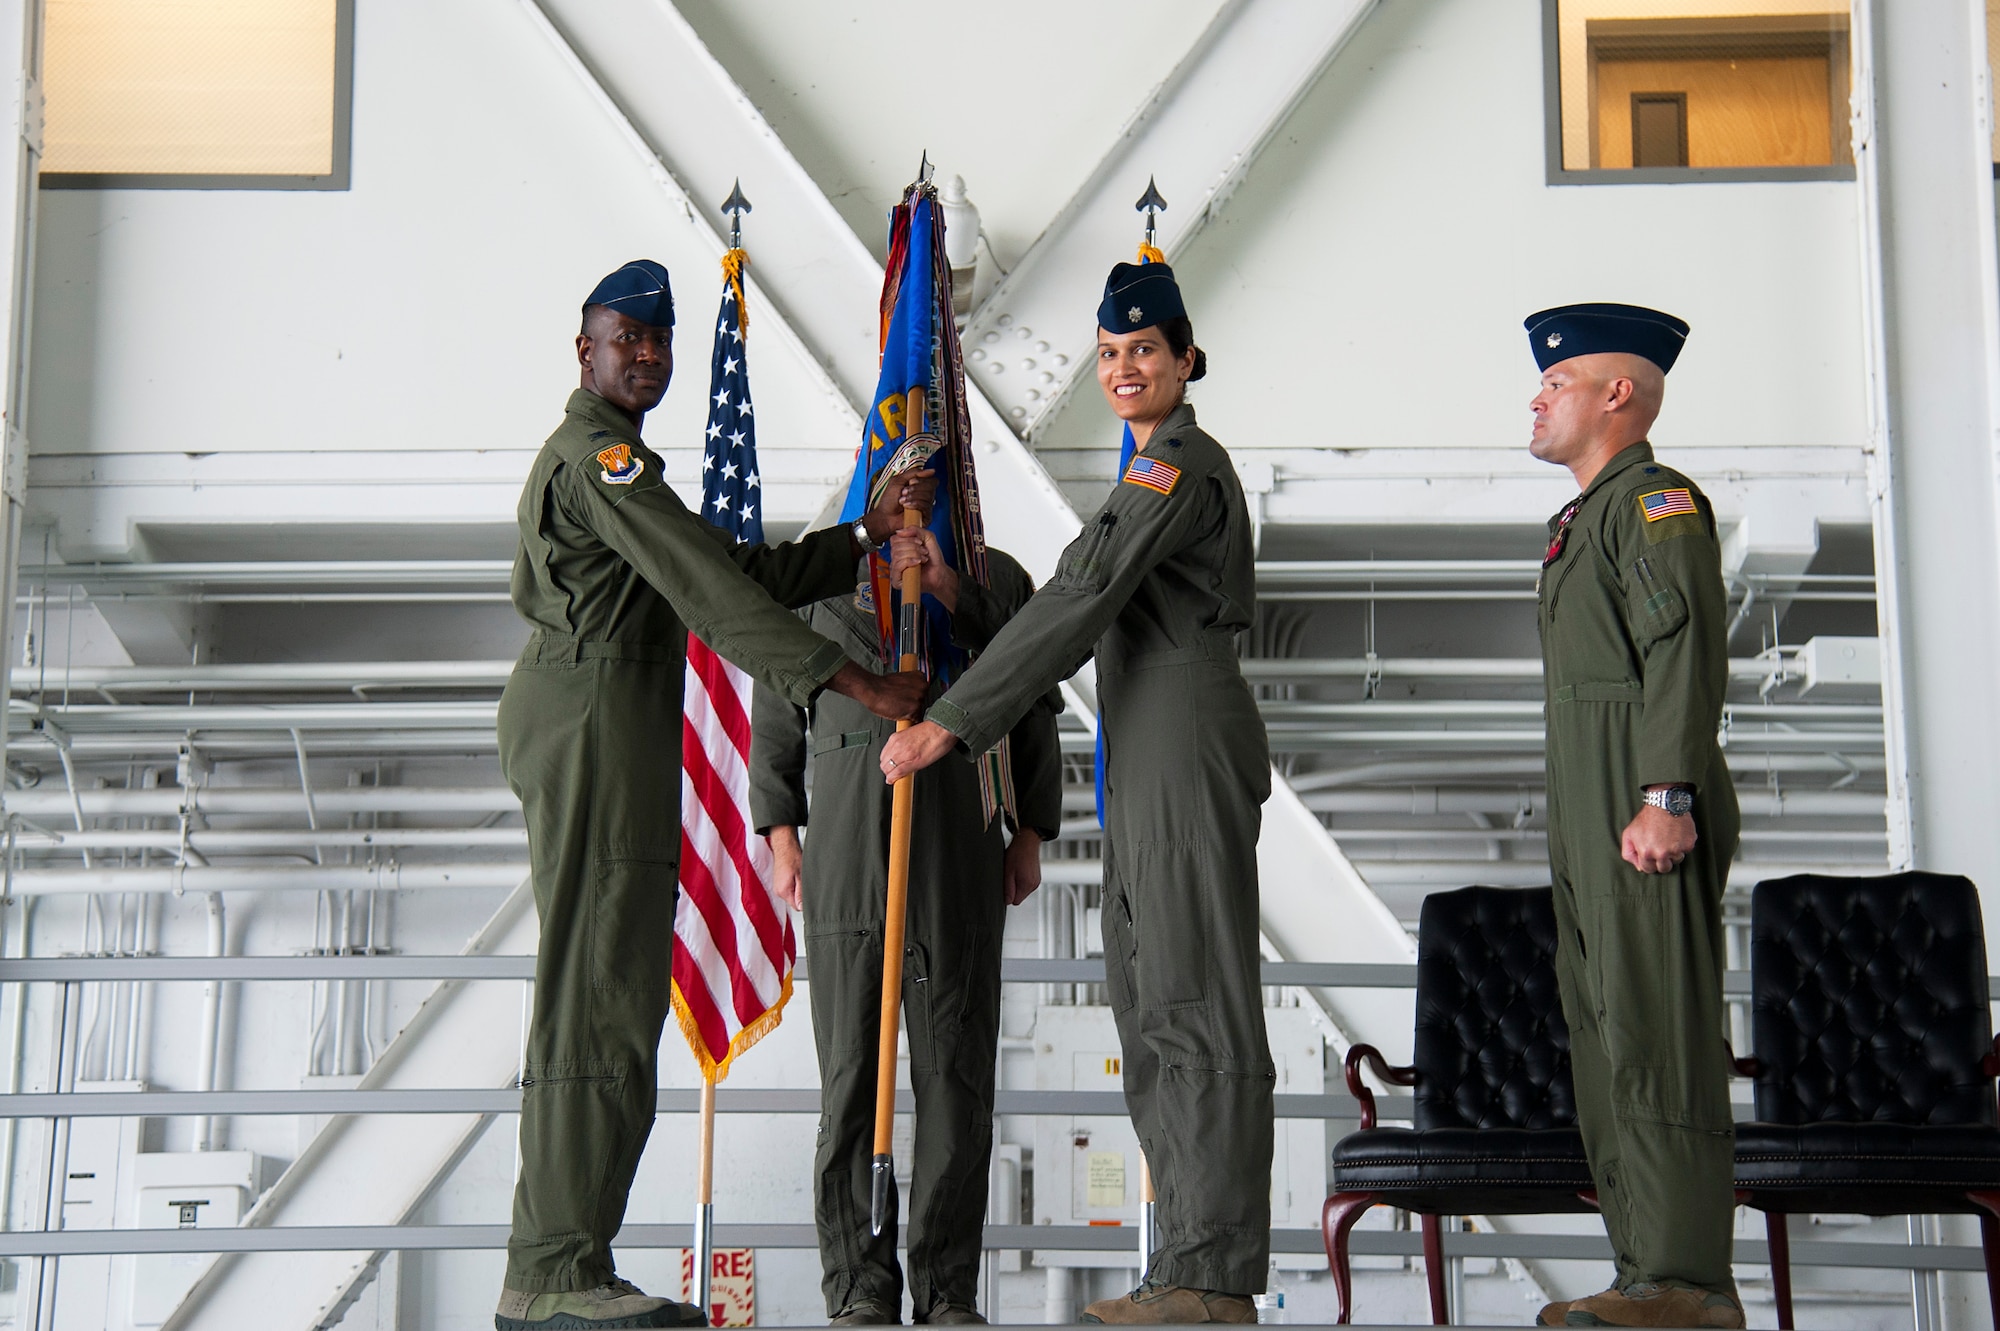 U.S. Air Force Lt. Col. Menola Guthrie, the 50th ARS commander, accepts the guidon from Col. Travis Edwards, the 6th Operations Group commander during a change of command ceremony, Aug. 2, 2019, at MacDill Air Force Base, Fla. Guthrie’s appointment as the 50th ARS commander, marks her second command assignment, having previously served as the 28th Expeditionary Air Refueling Squadron commander, at Al Udeid Air Base, Qatar from April 2018 to August 2018. (U.S. Air Force photo by Airman 1st Class Shannon Bowman)